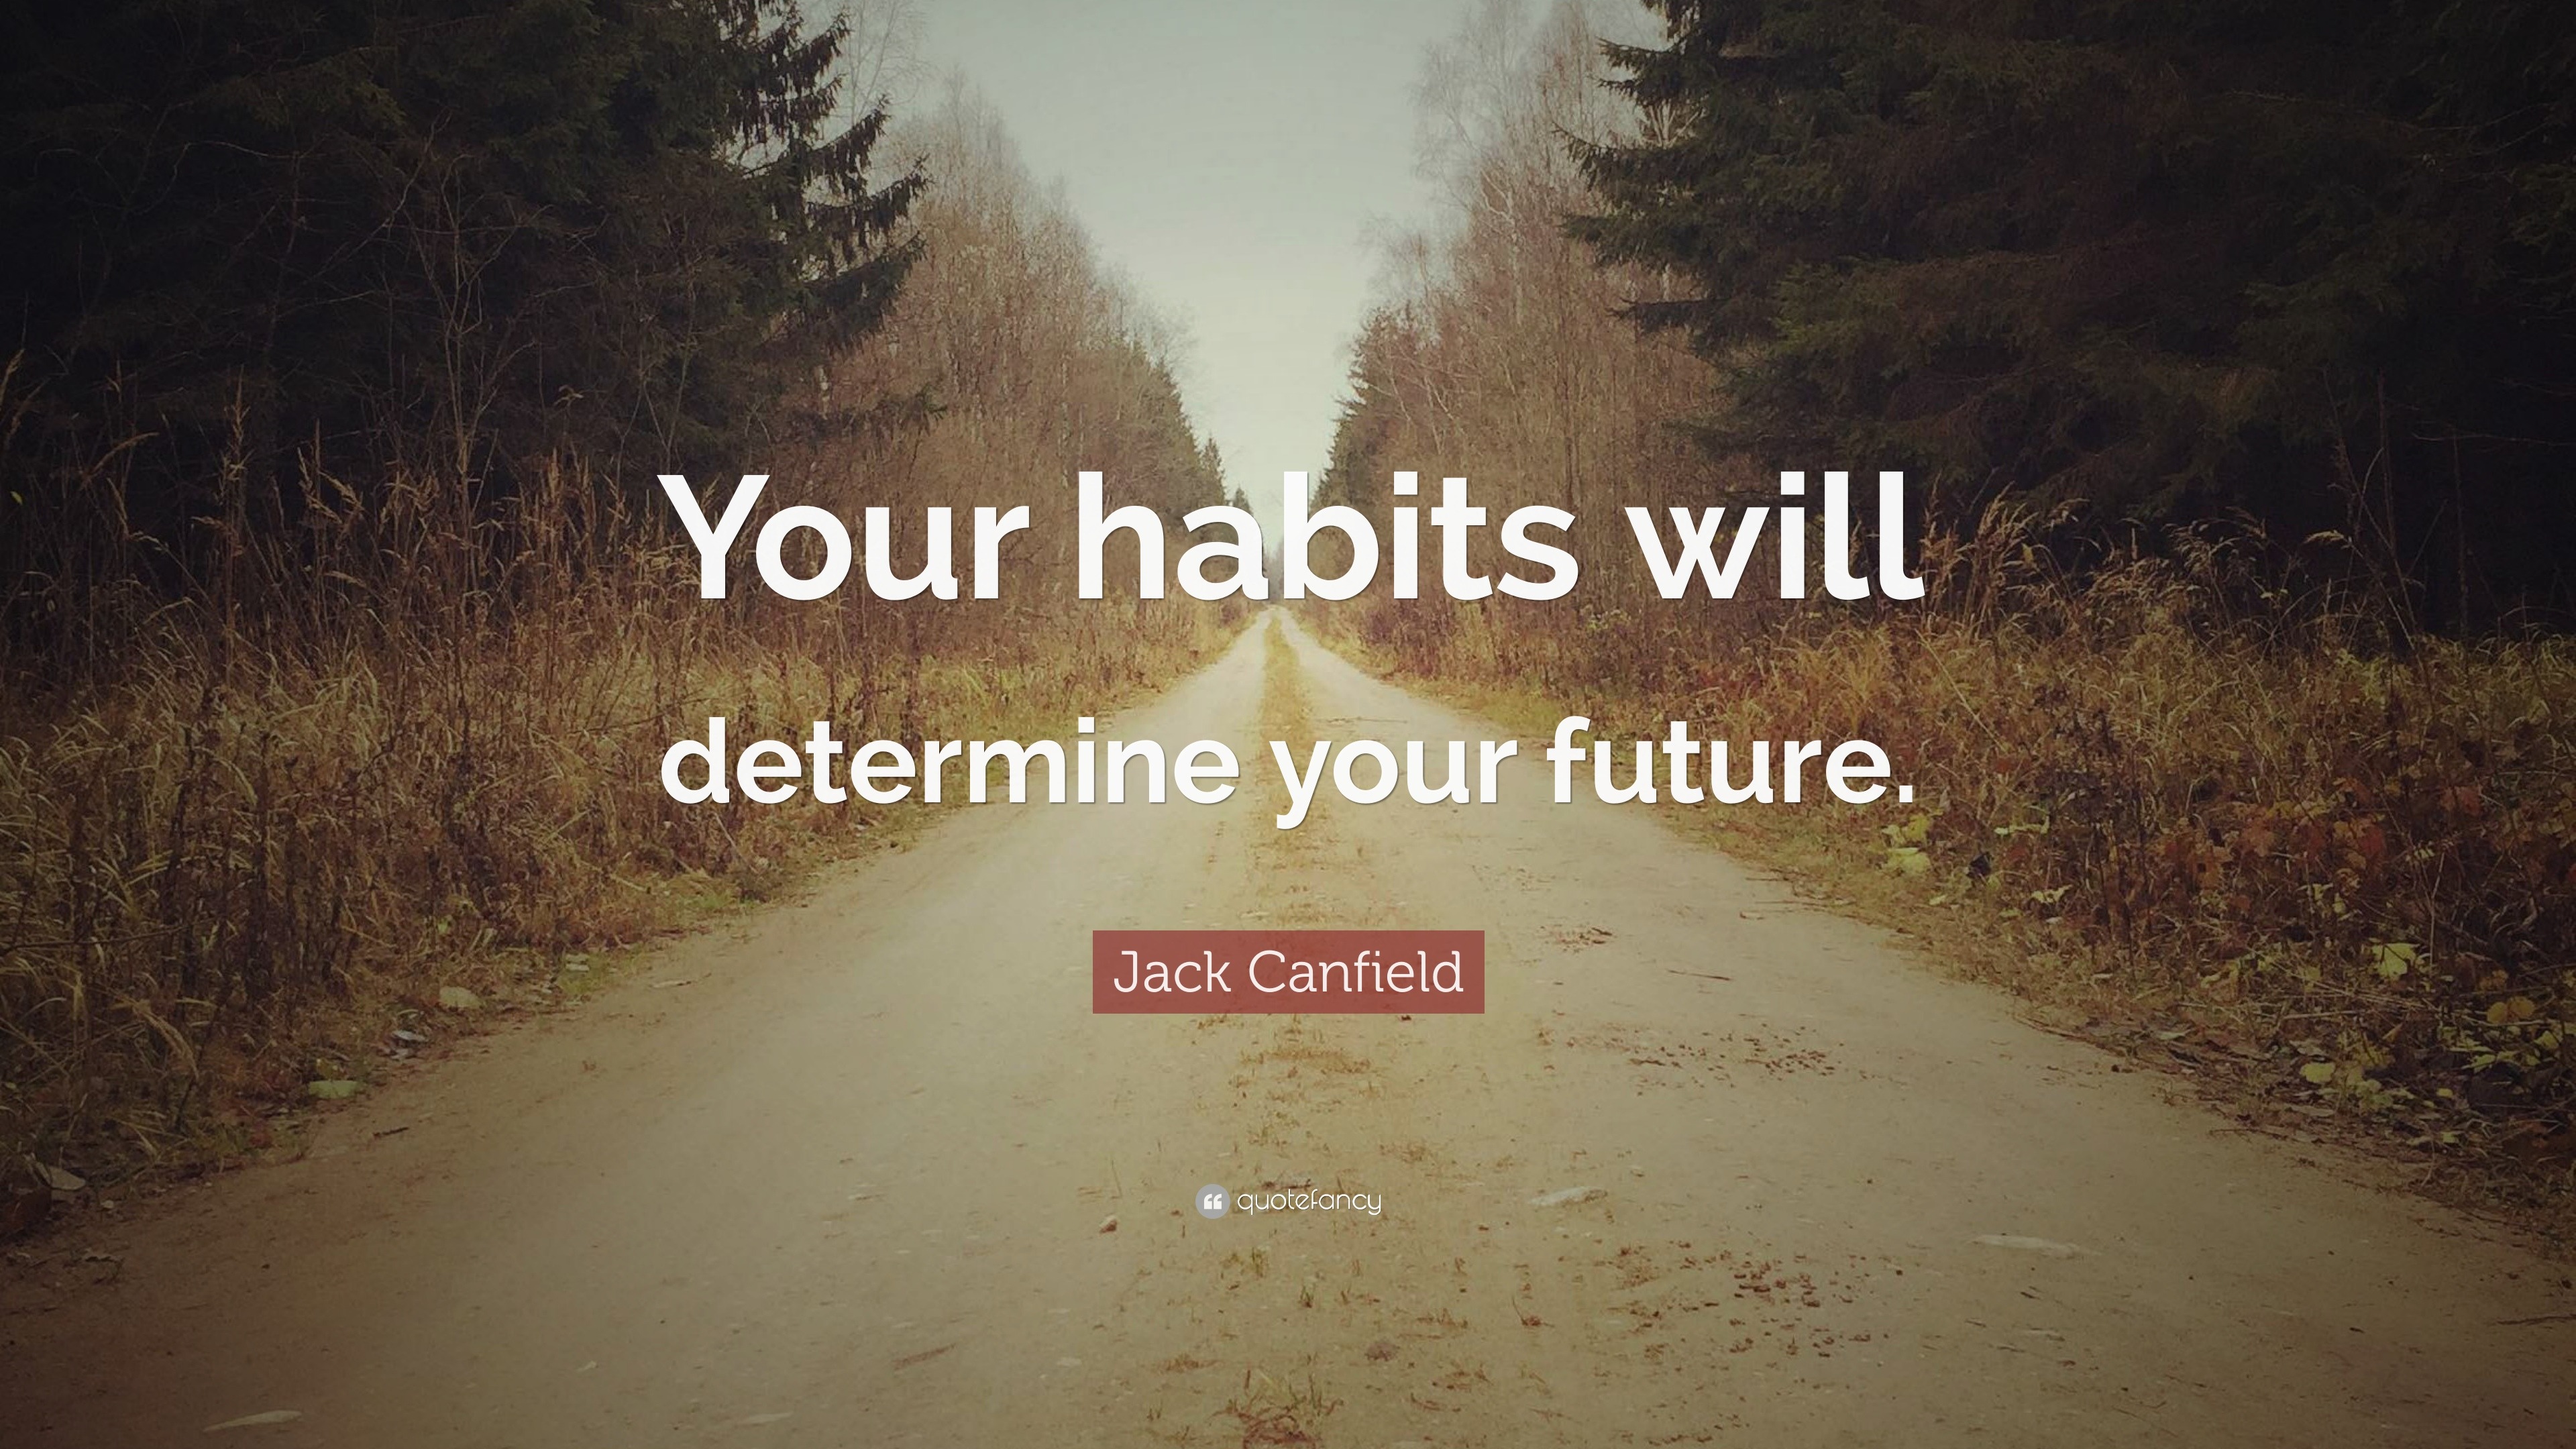 592239-Jack-Canfield-Quote-Your-habits-will-determine-your-future.jpg